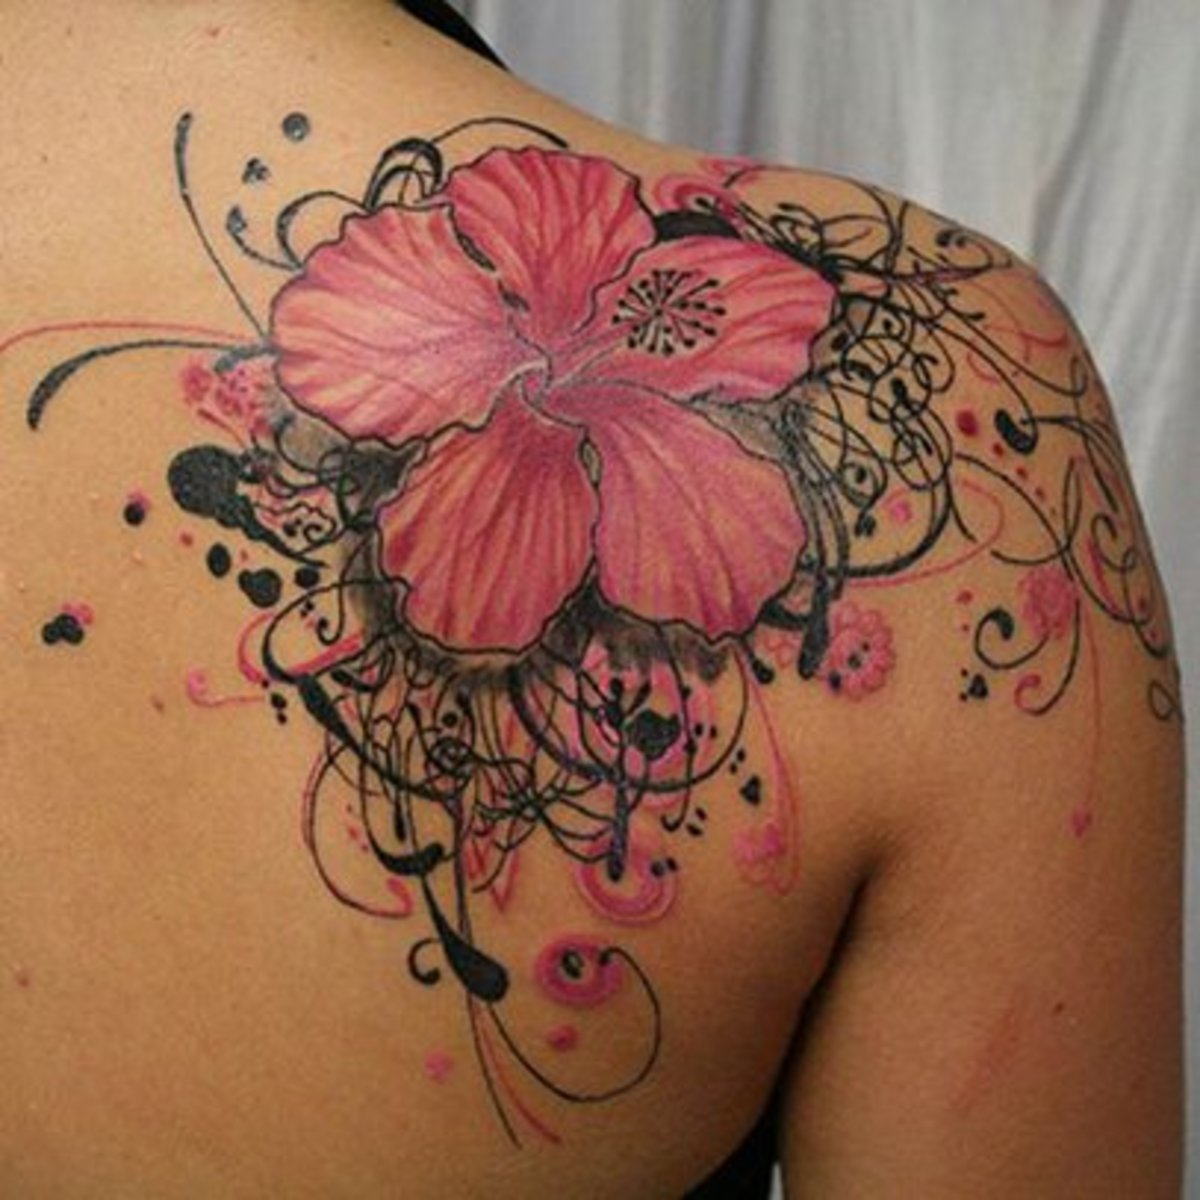 Feminine Shoulder Cap Tattoos Tattoo Ideas Artists And Models intended for size 1200 X 1200